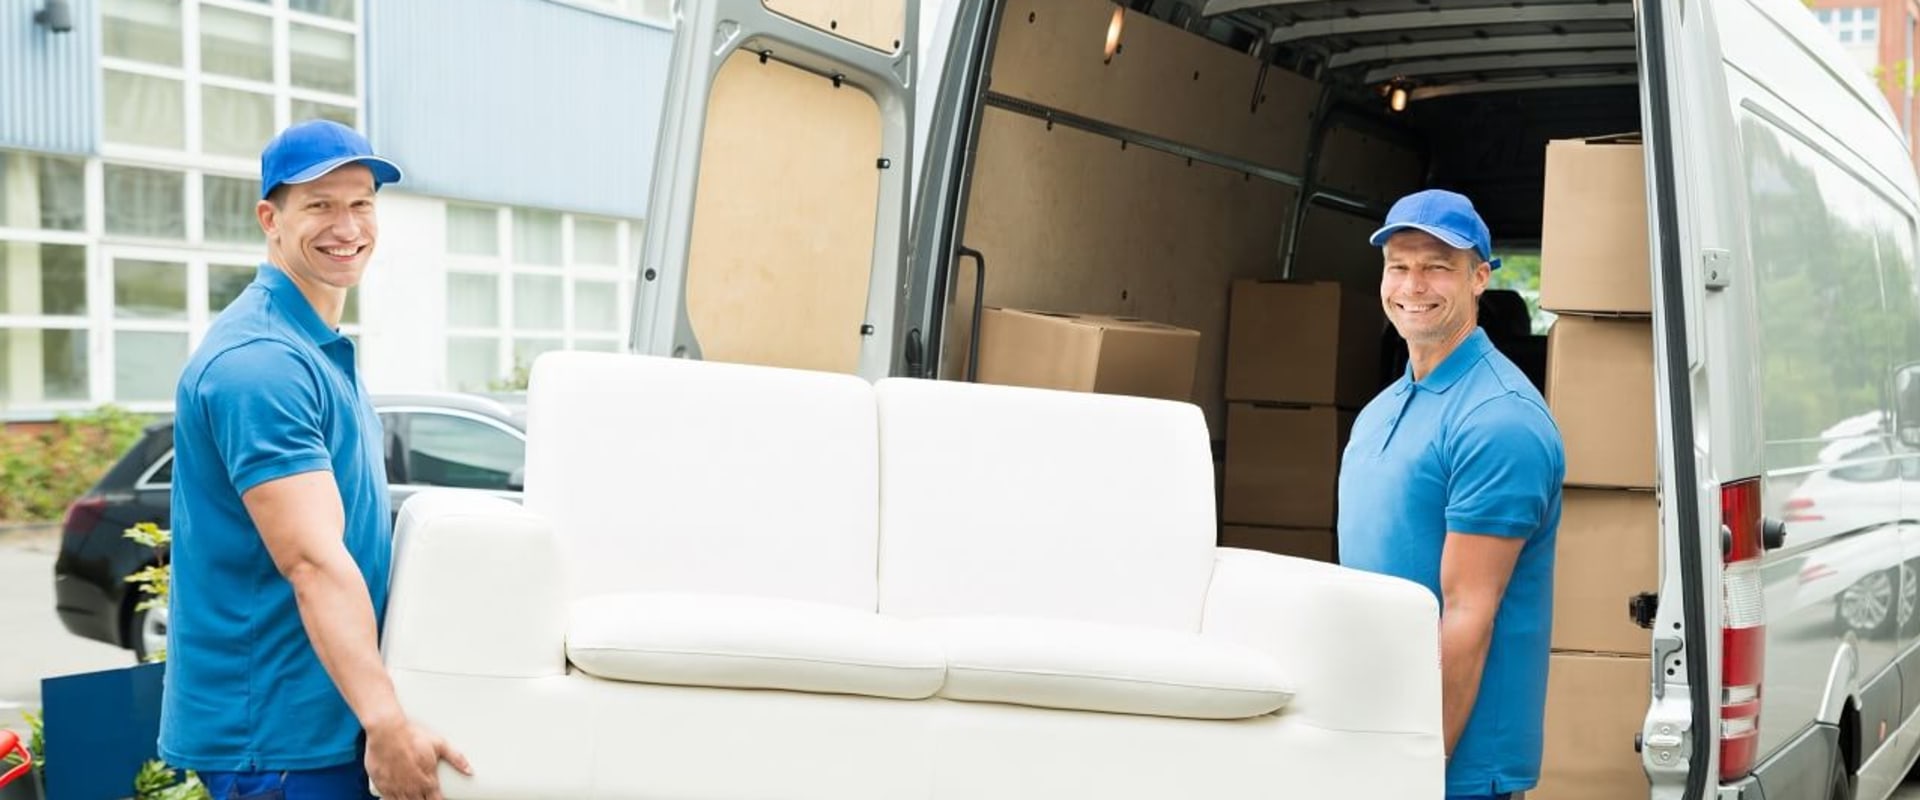 Moving Services in Miami: Your Guide to Long Distance Residential Moving